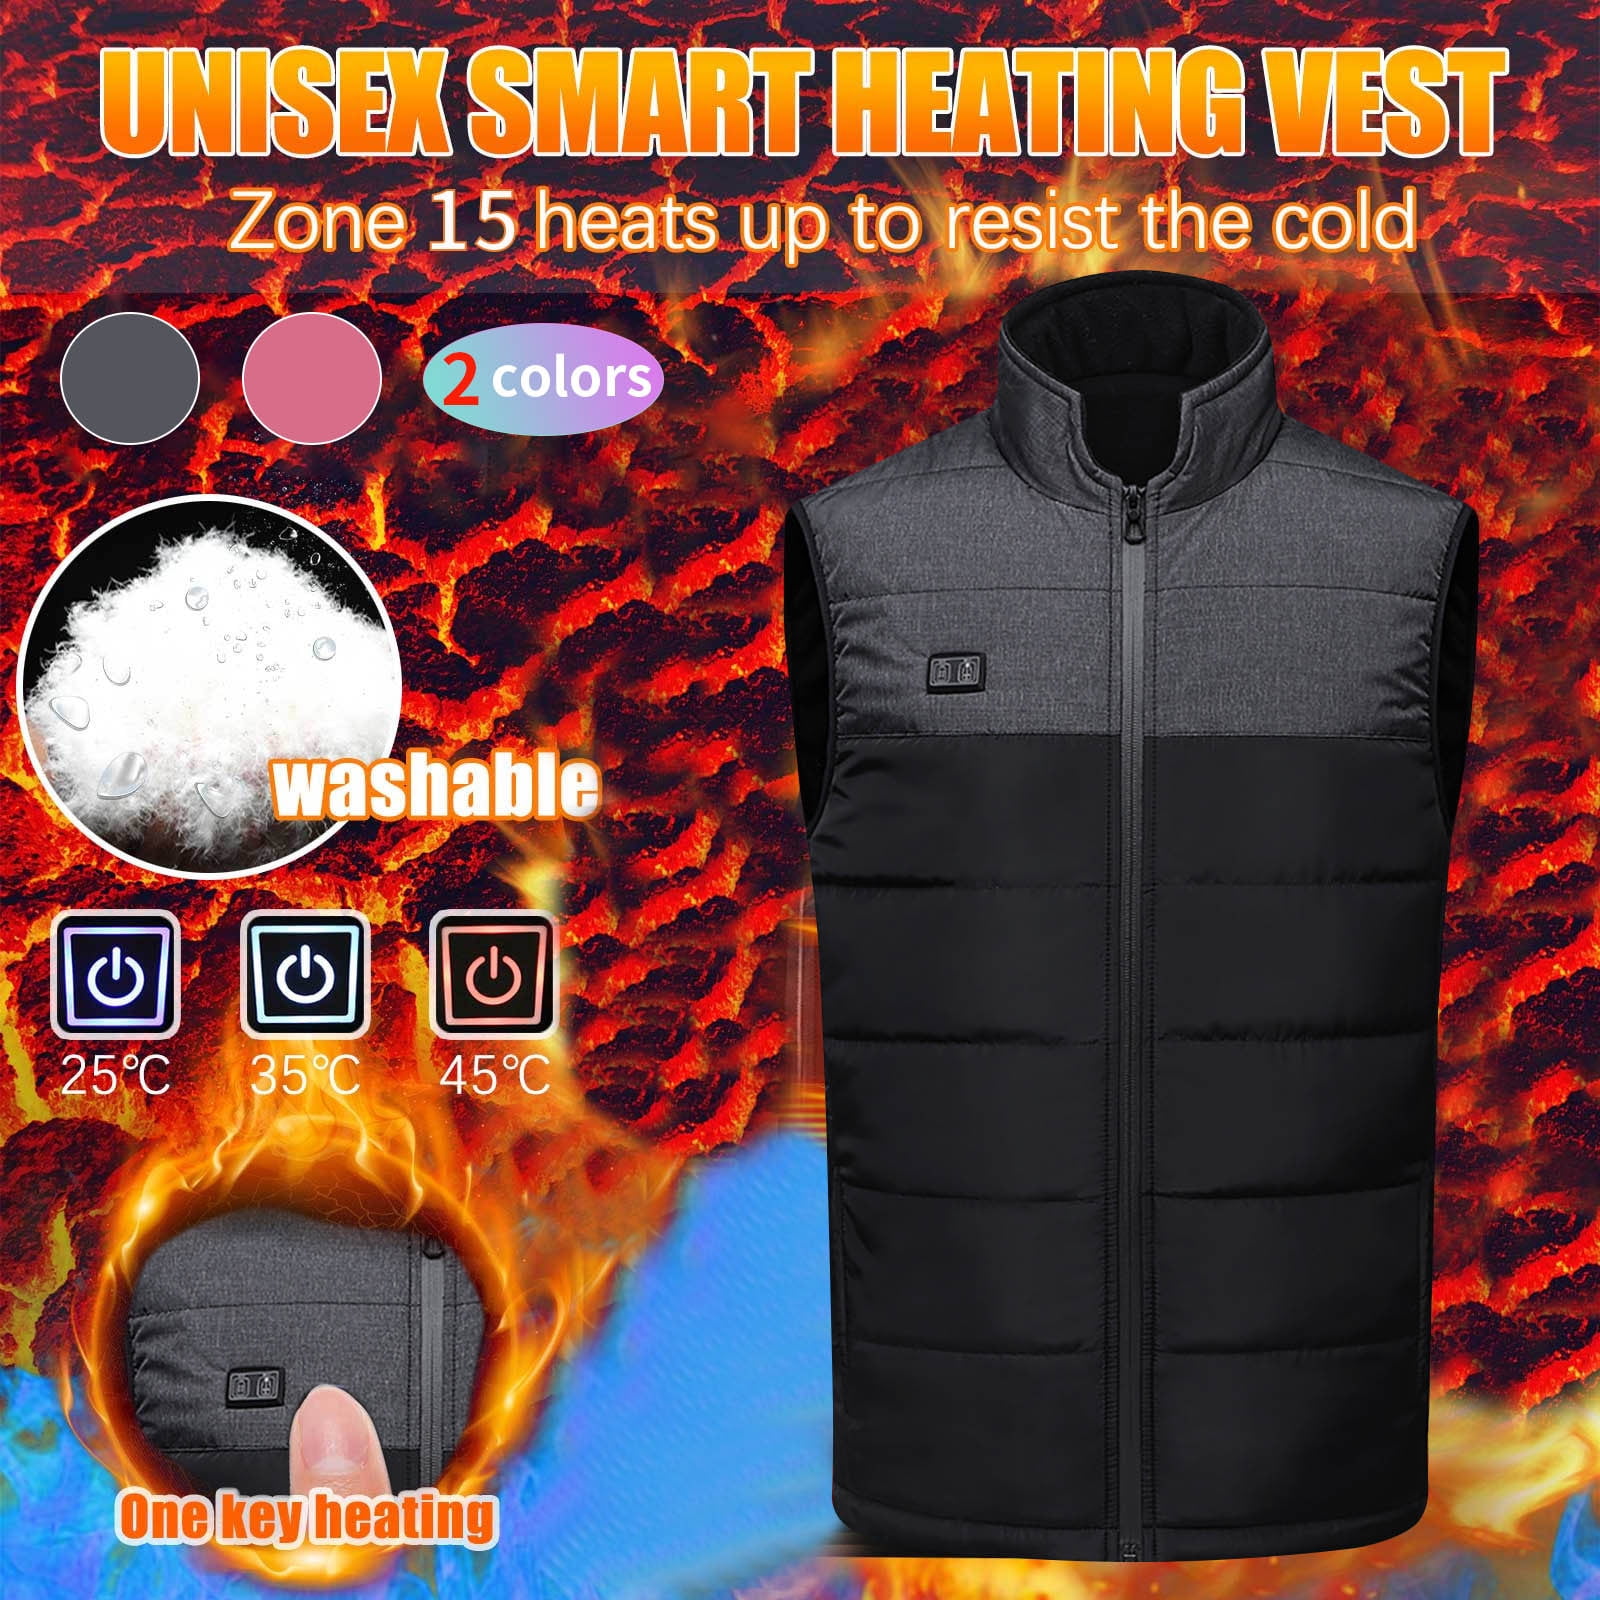 Symoid Heated Vest for Men and Women,Men's Winter Vest Jacket,Womens  Outdoor Warm Clothes,Ski Clothing,Cooling Casual Fishing Vests Black Size M  